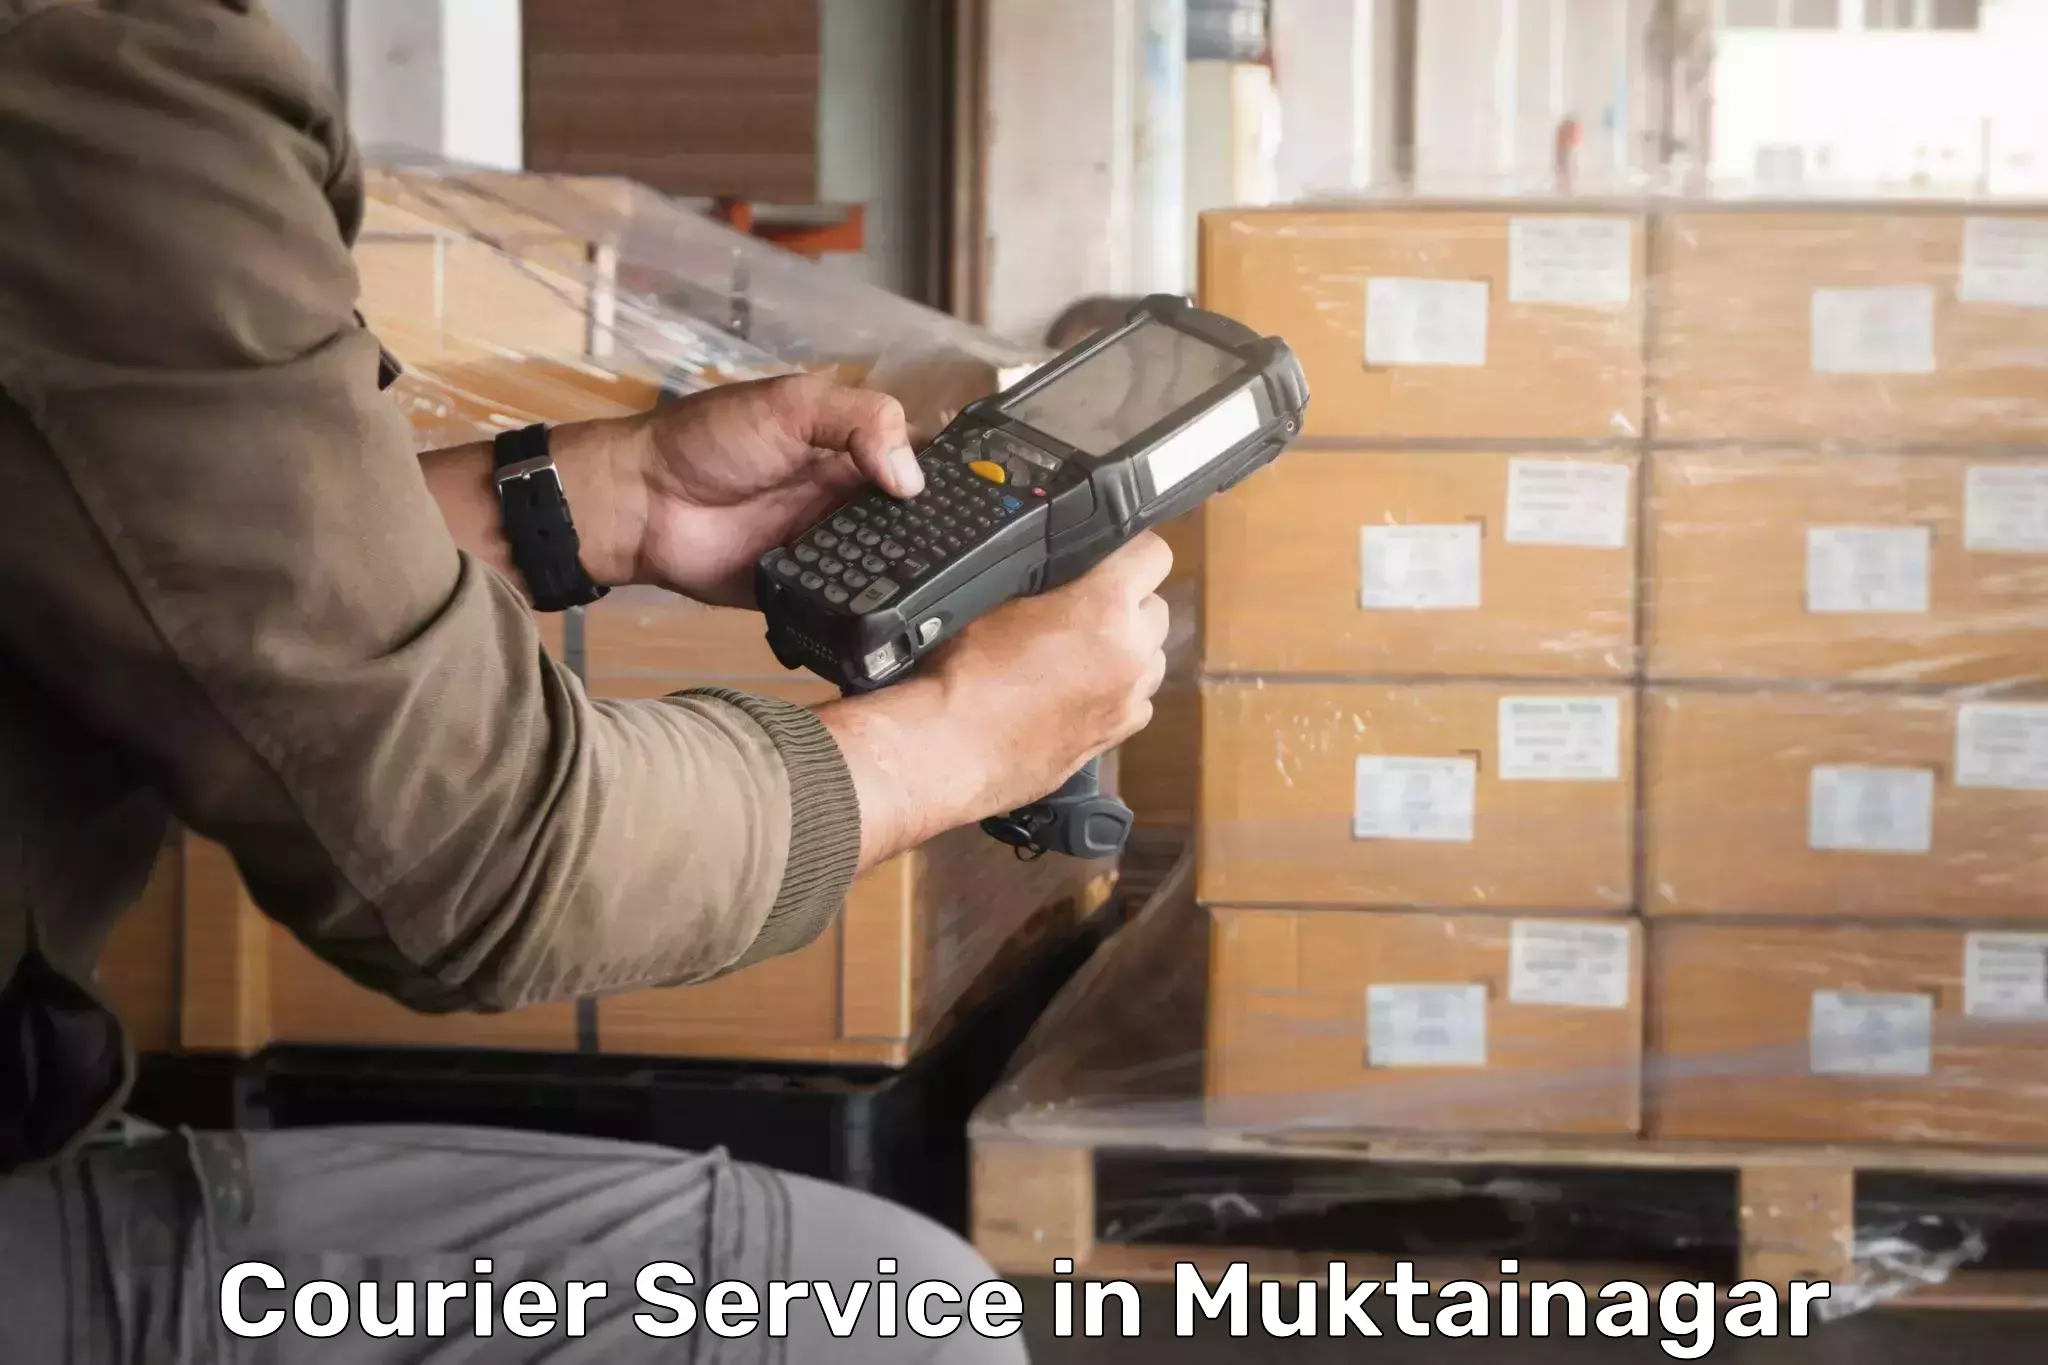 Fast-track shipping solutions in Muktainagar